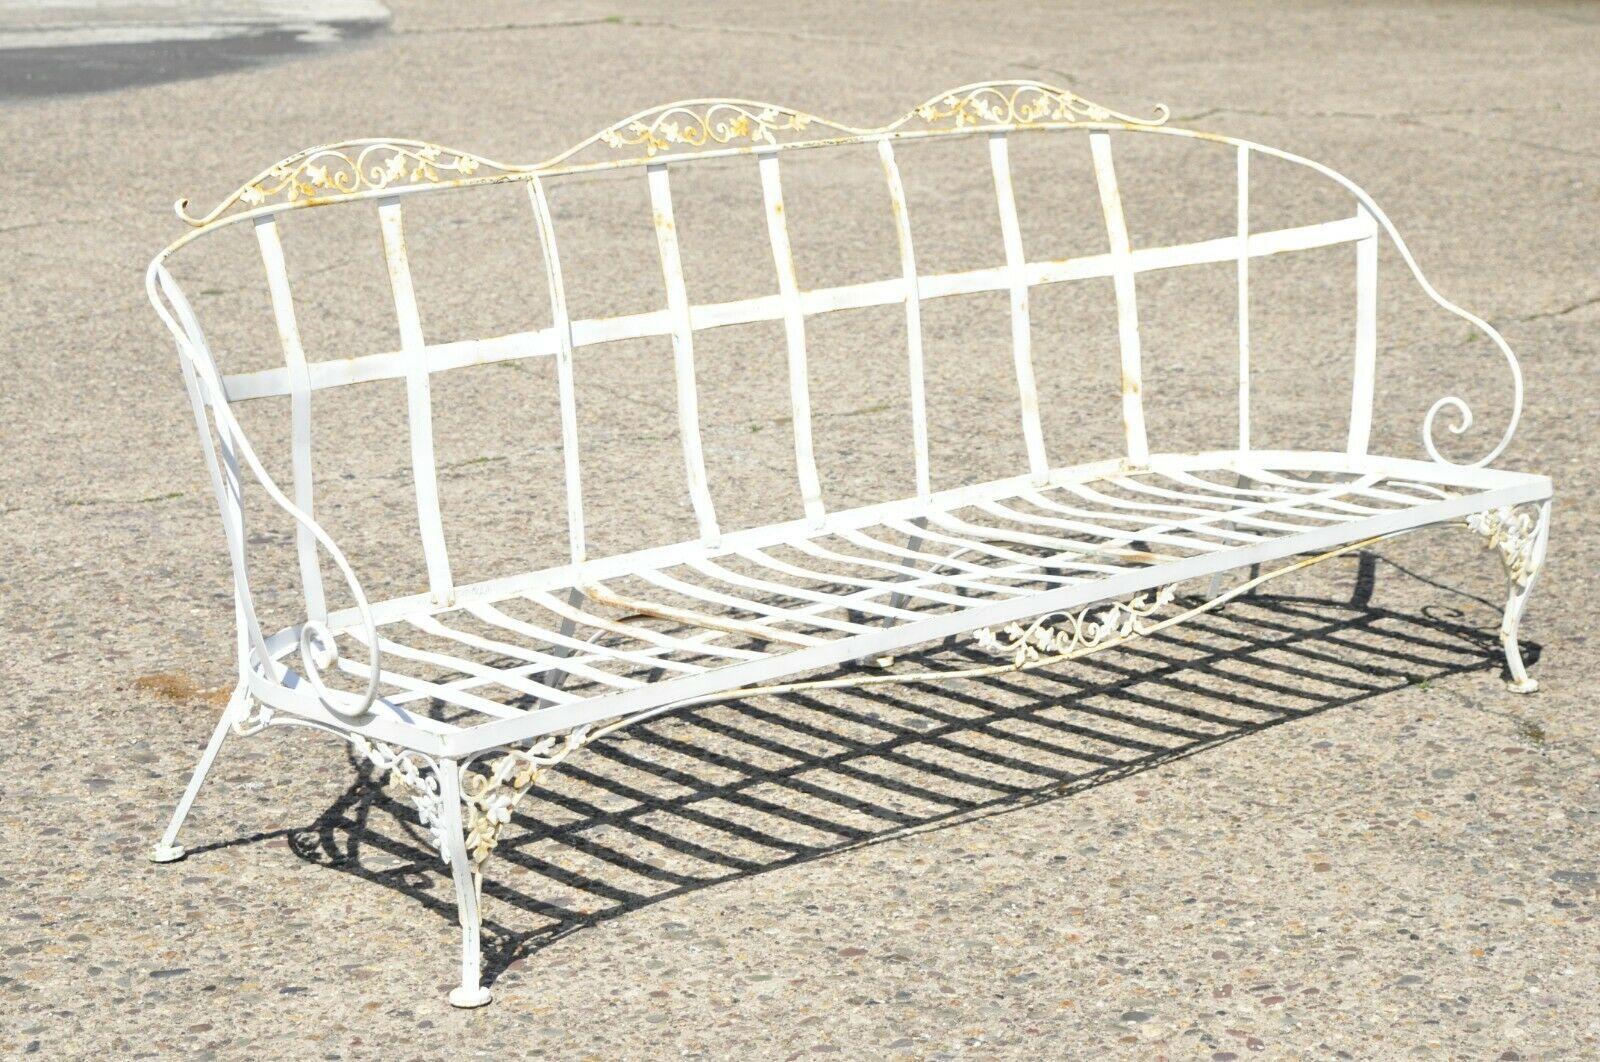 Vintage woodard chantilly rose wrought iron garden patio sunroom sofa. Item features original Woodard markings, wrought iron construction, very nice vintage item, quality American craftsmanship, great style and form. Mid 20th Century. Measurements: